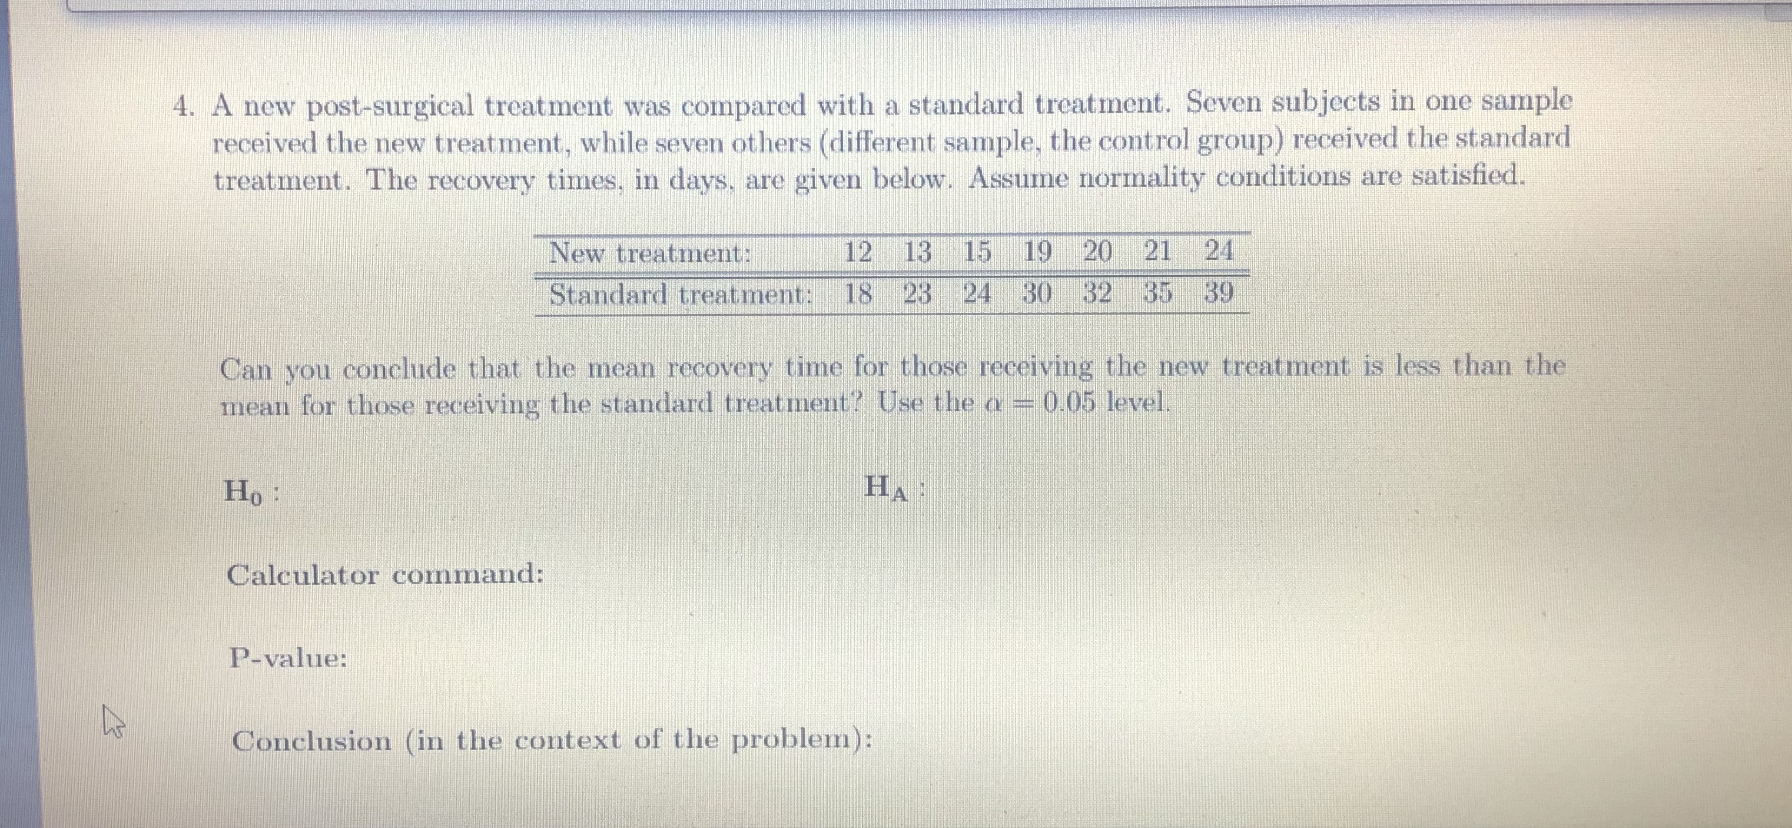 A new post-surgical treatment was compared with a standard treatment. Seven subjects in one sample
received the new treatment, while seven others (different sample, the control group) received the standard
treatment. The recovery times, in days, are given below. Assume normality conditions are satisfied.
